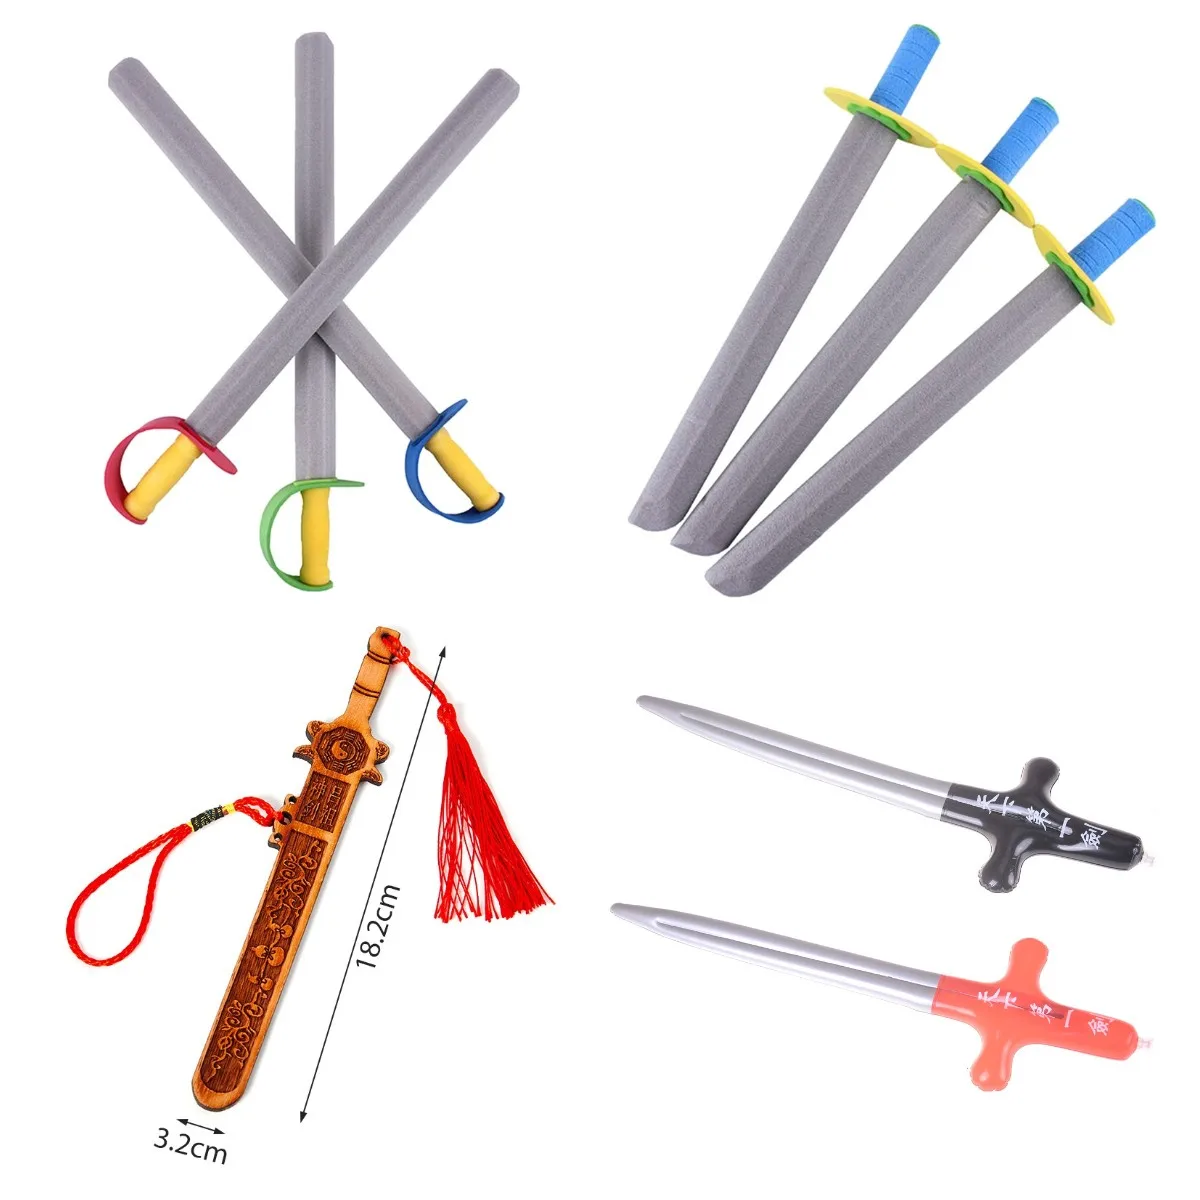 

Creative EVA Foam Sword Knife Weapon Safety Performance Props Cosplay Costume Role Play Novelty Toy for Children Adults